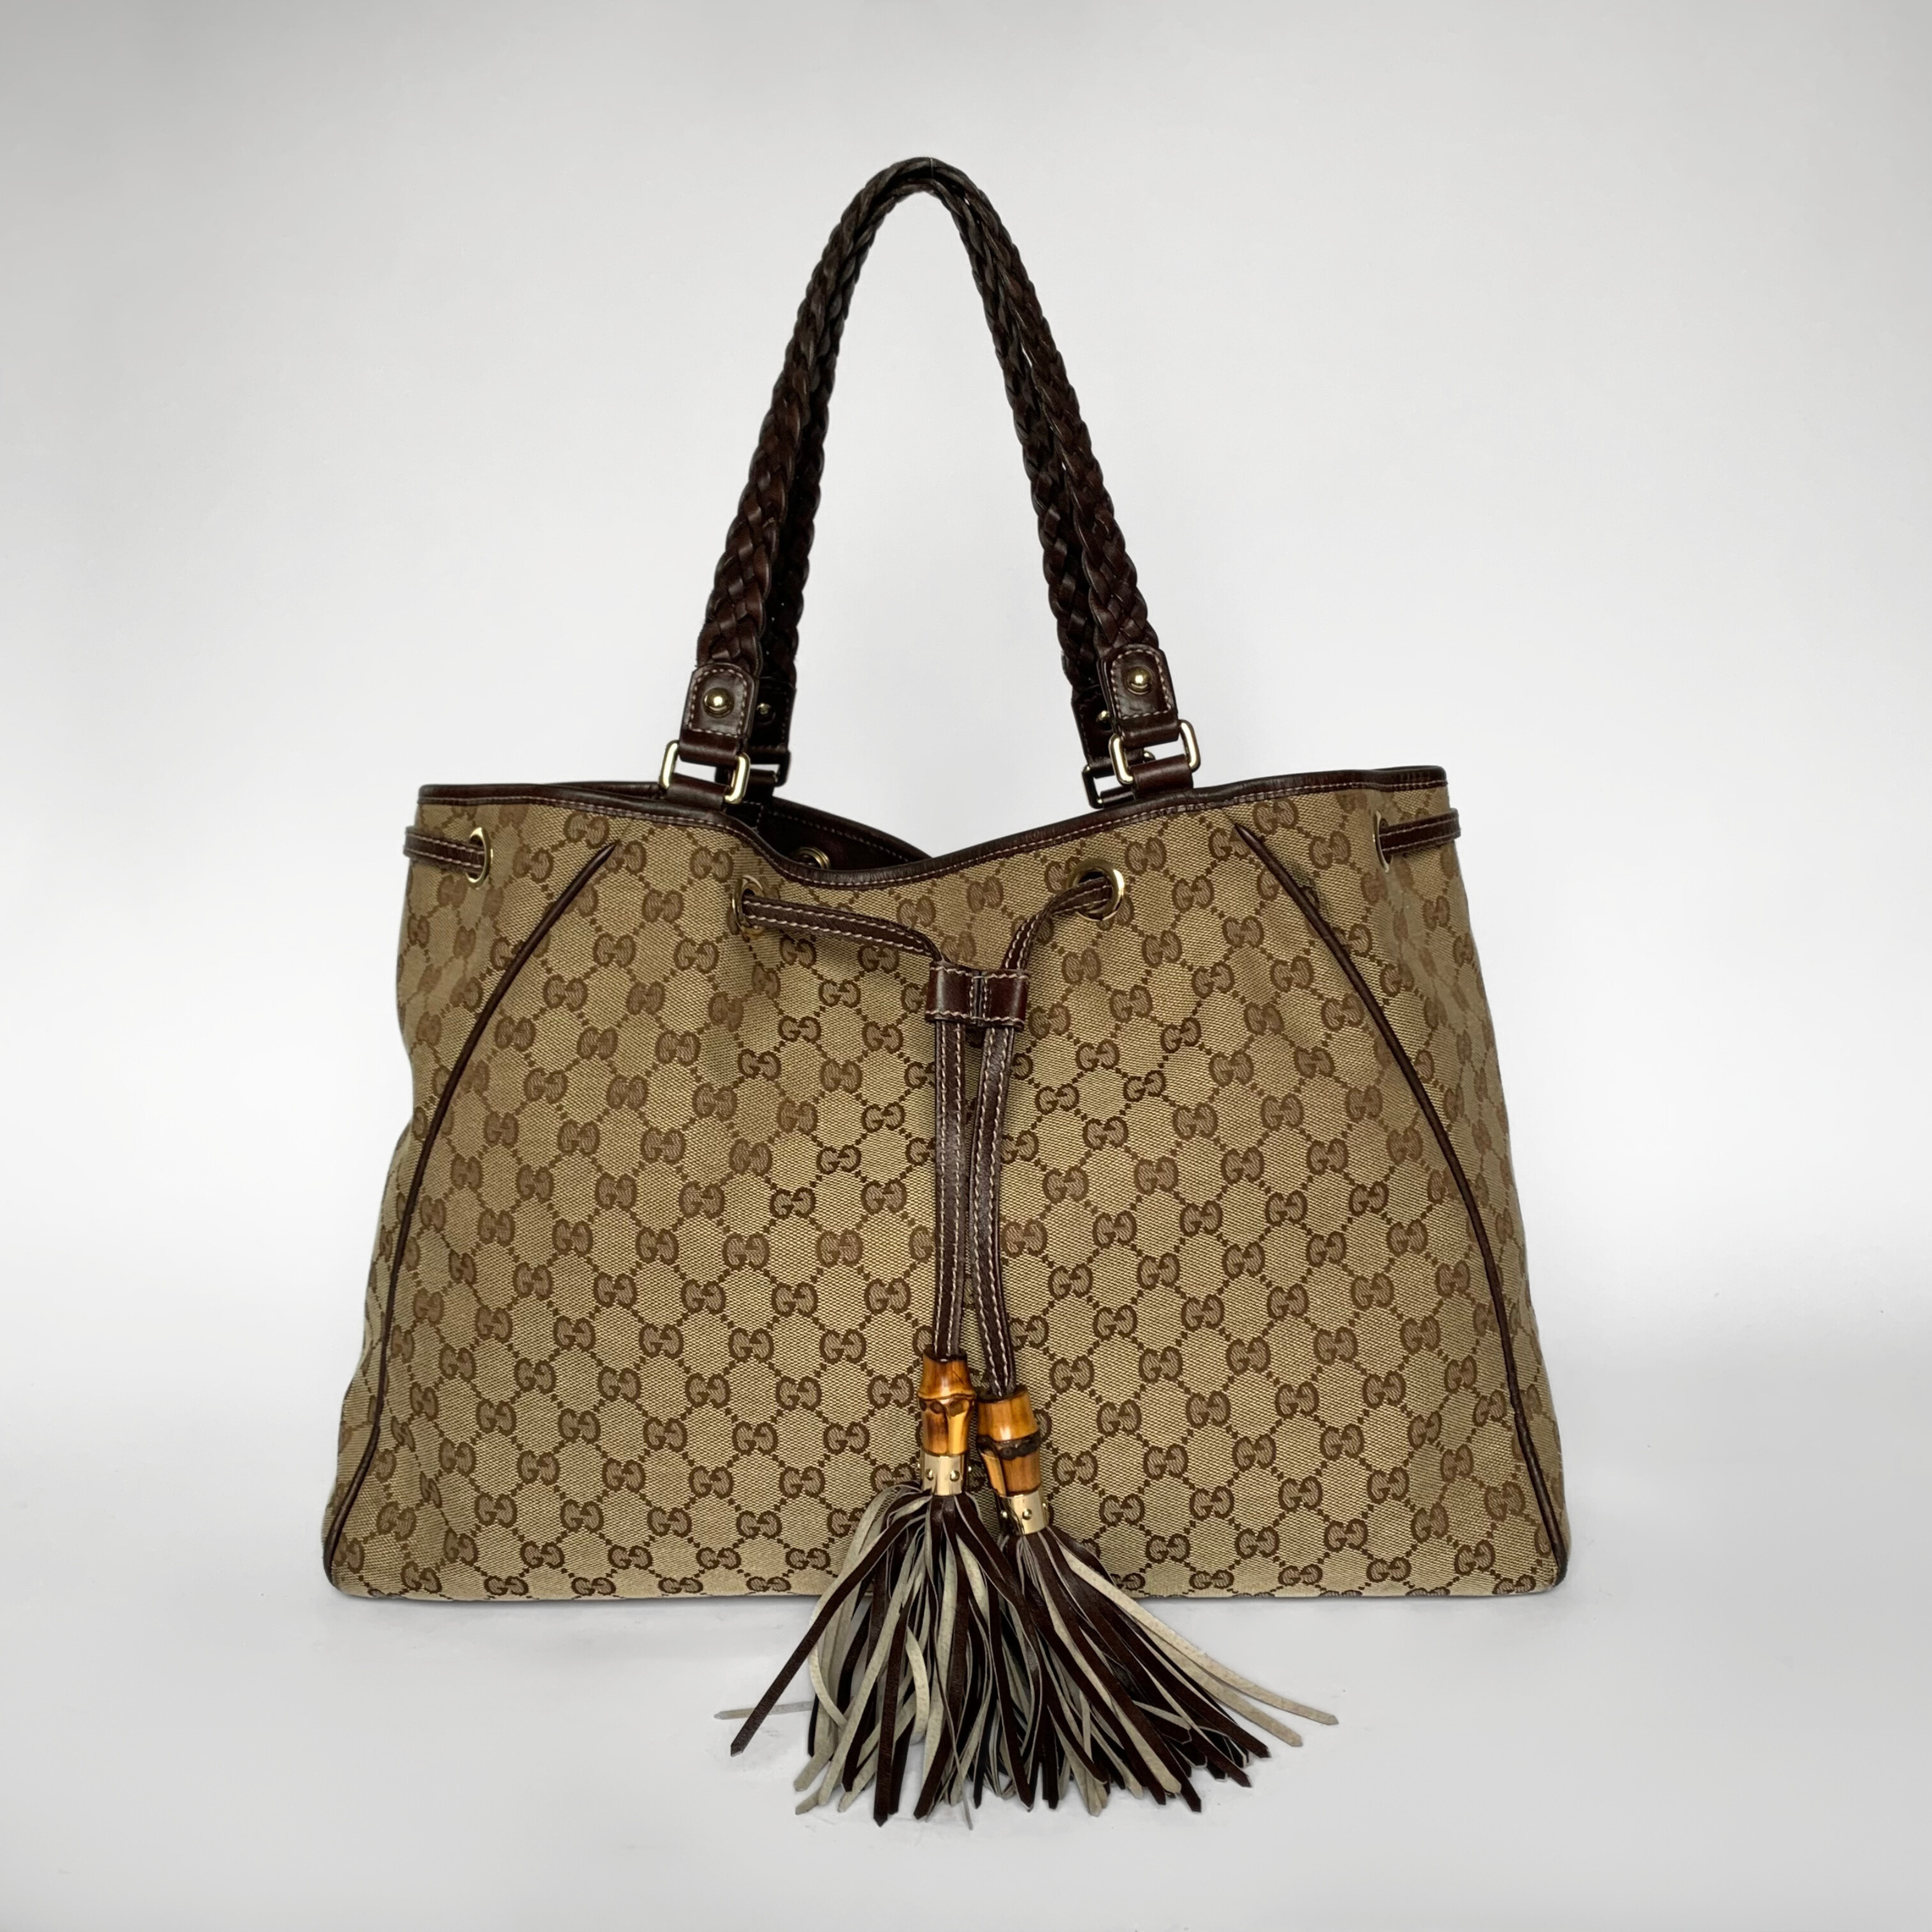 Gucci Brown Leather Braided Handle Tassel Tote Bag